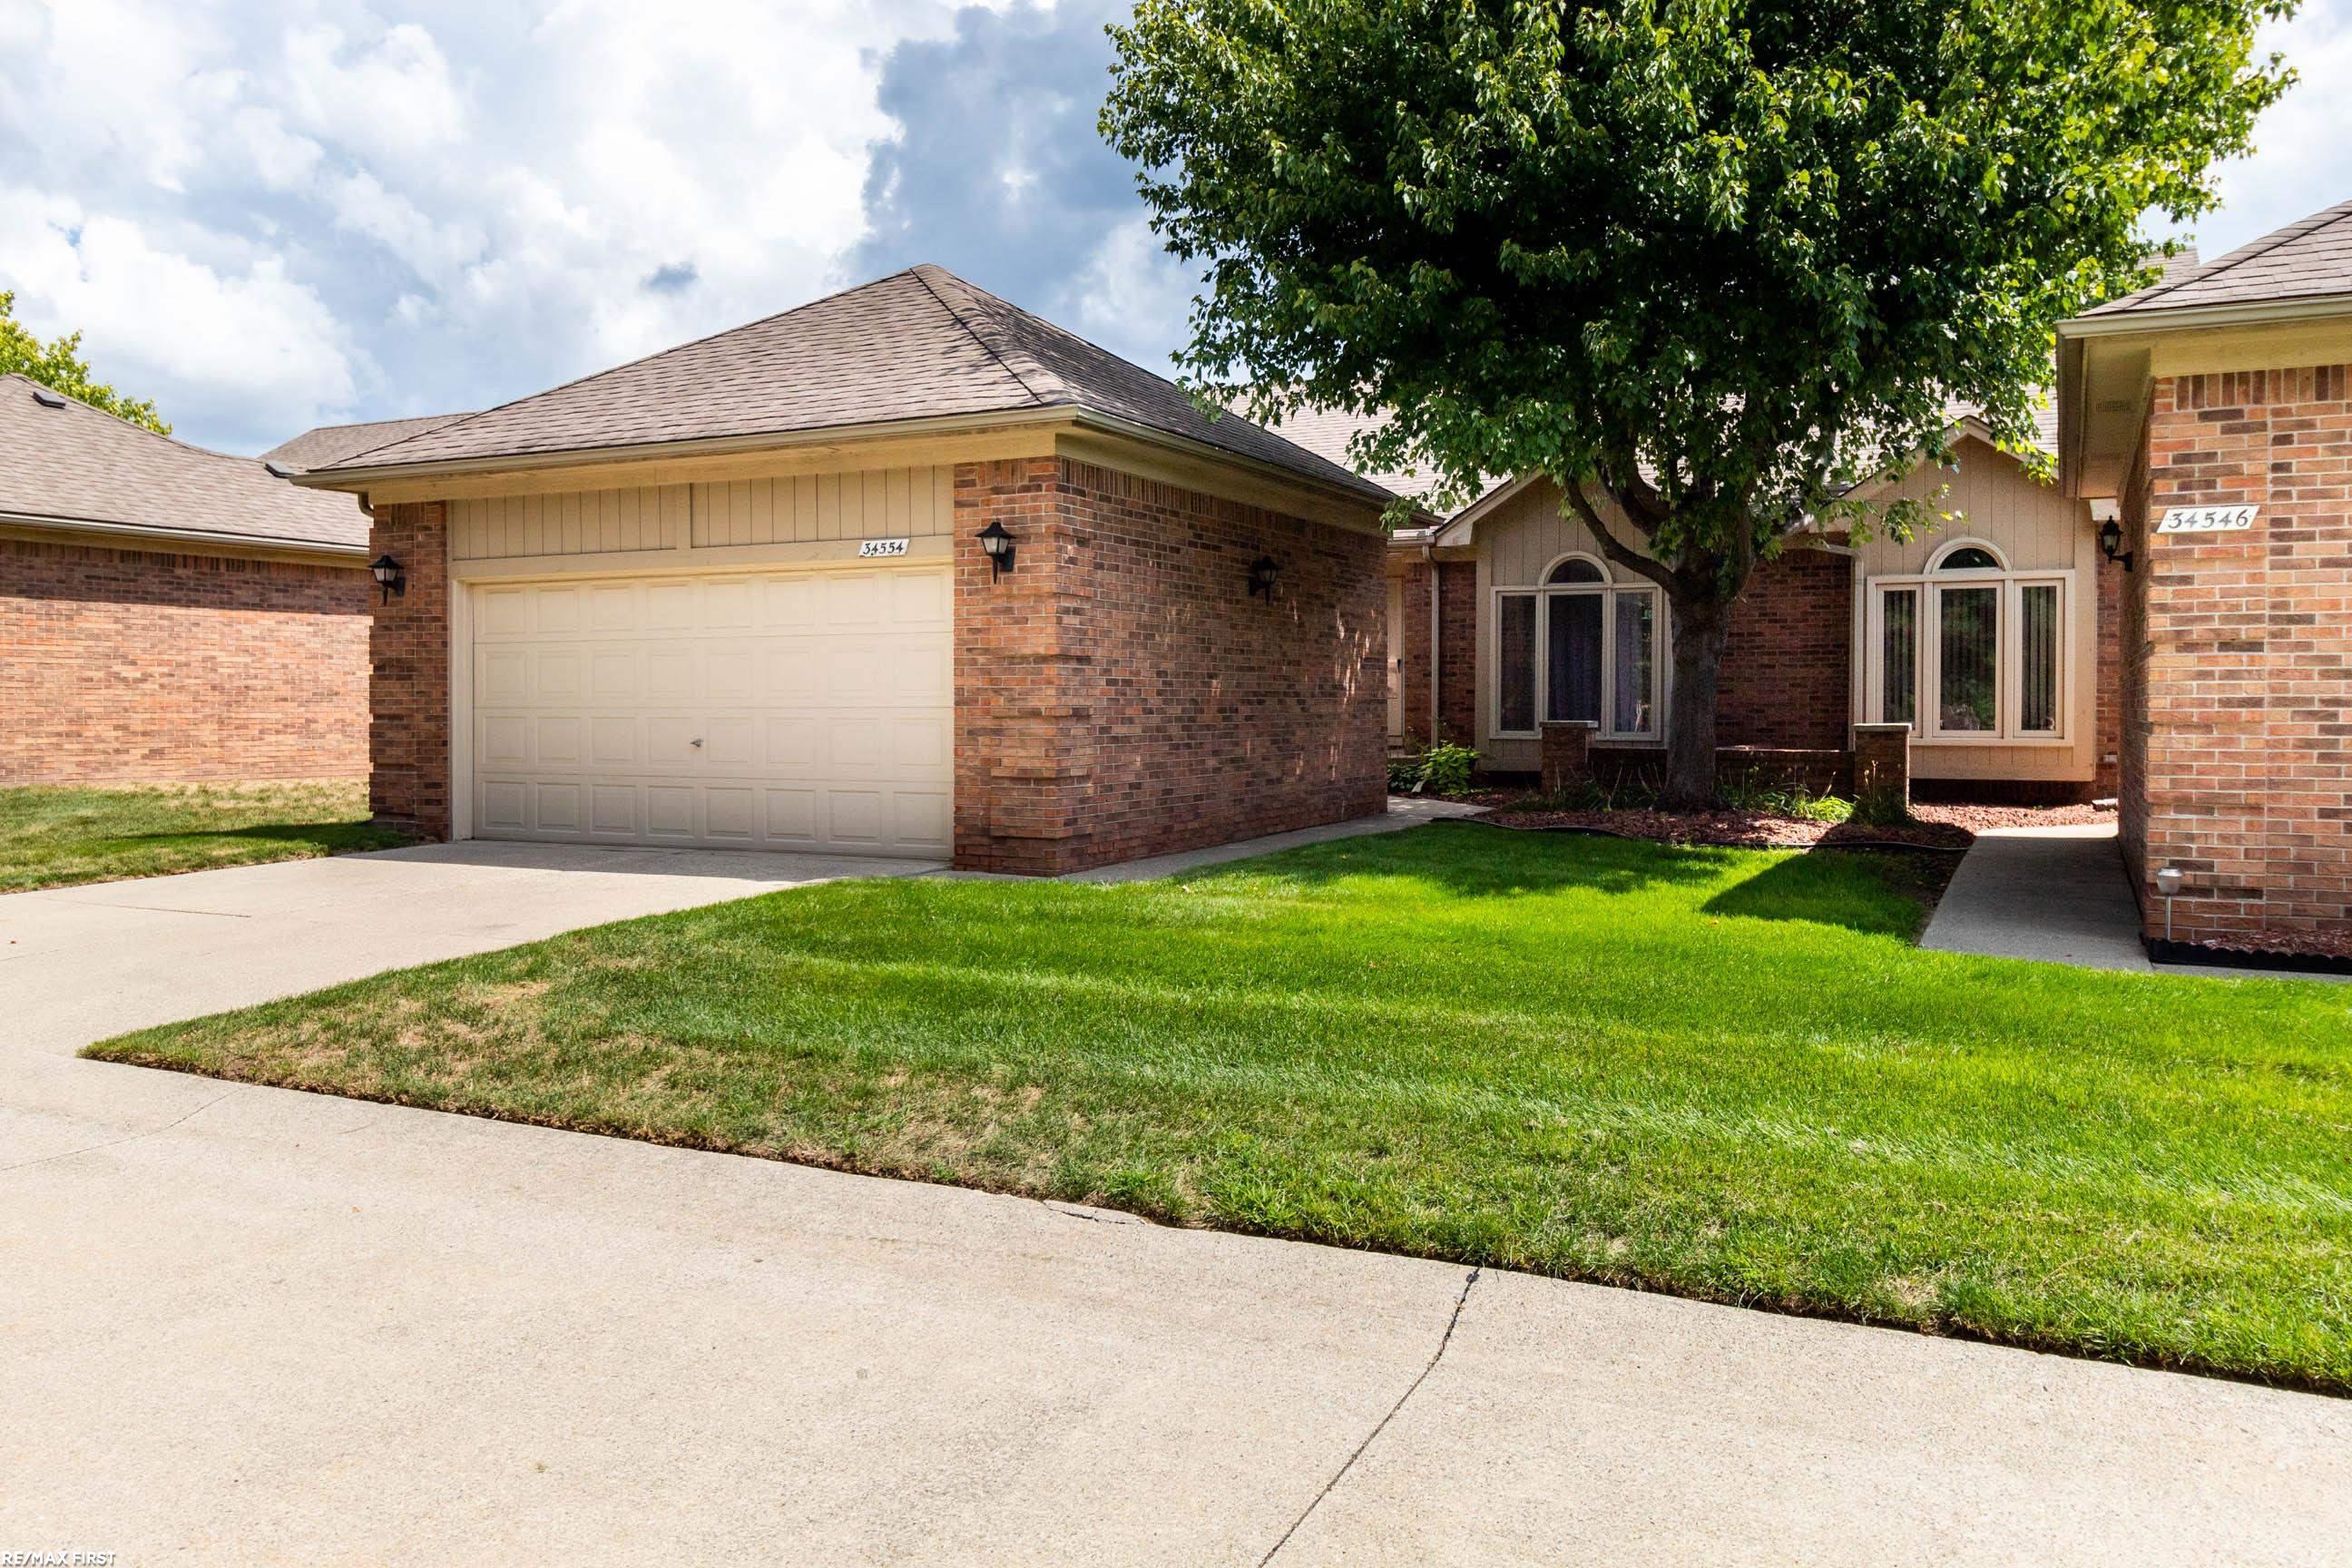 34554 Maple Lane Drive, Sterling Heights, MI 48312